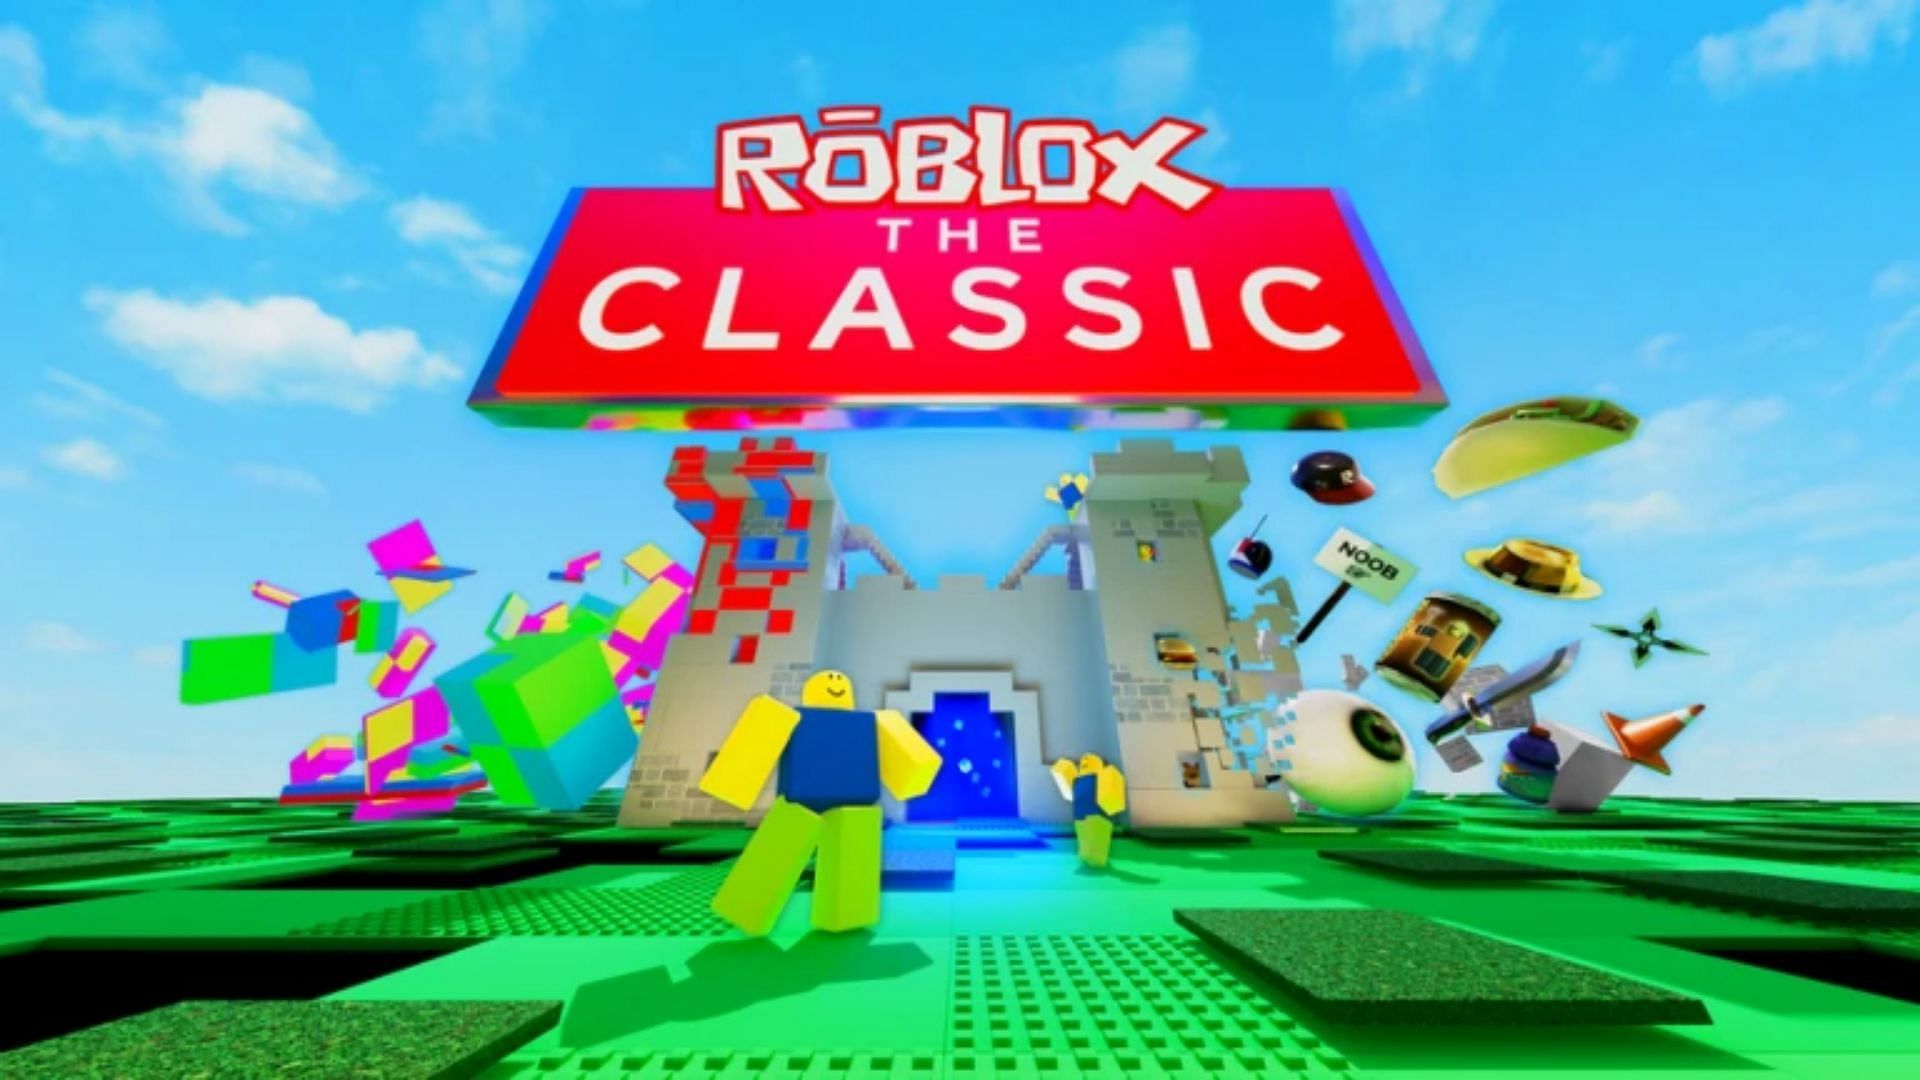 How to get the Roblox Classic VIP T-Shirt